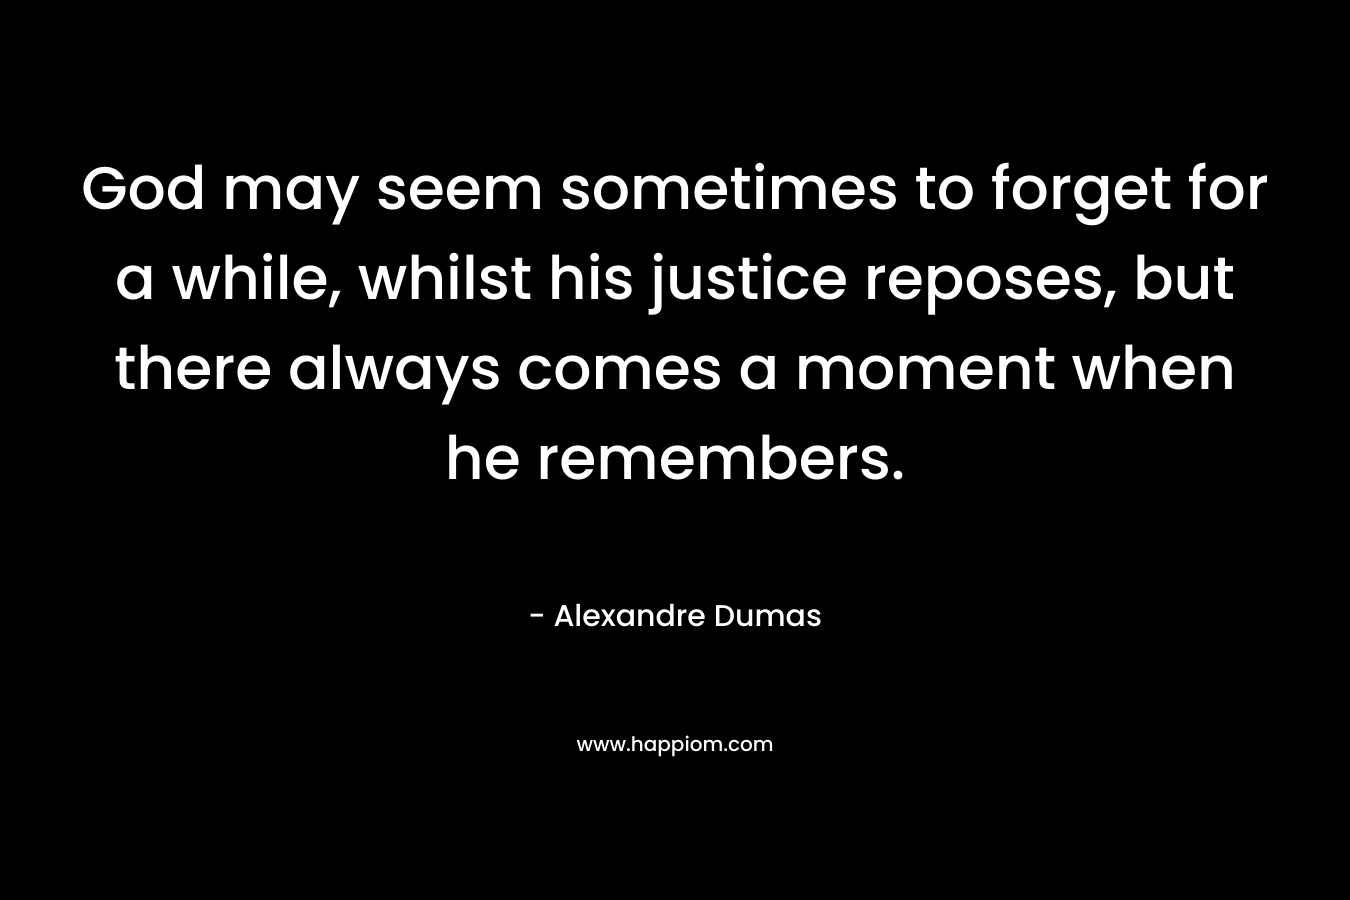 God may seem sometimes to forget for a while, whilst his justice reposes, but there always comes a moment when he remembers.